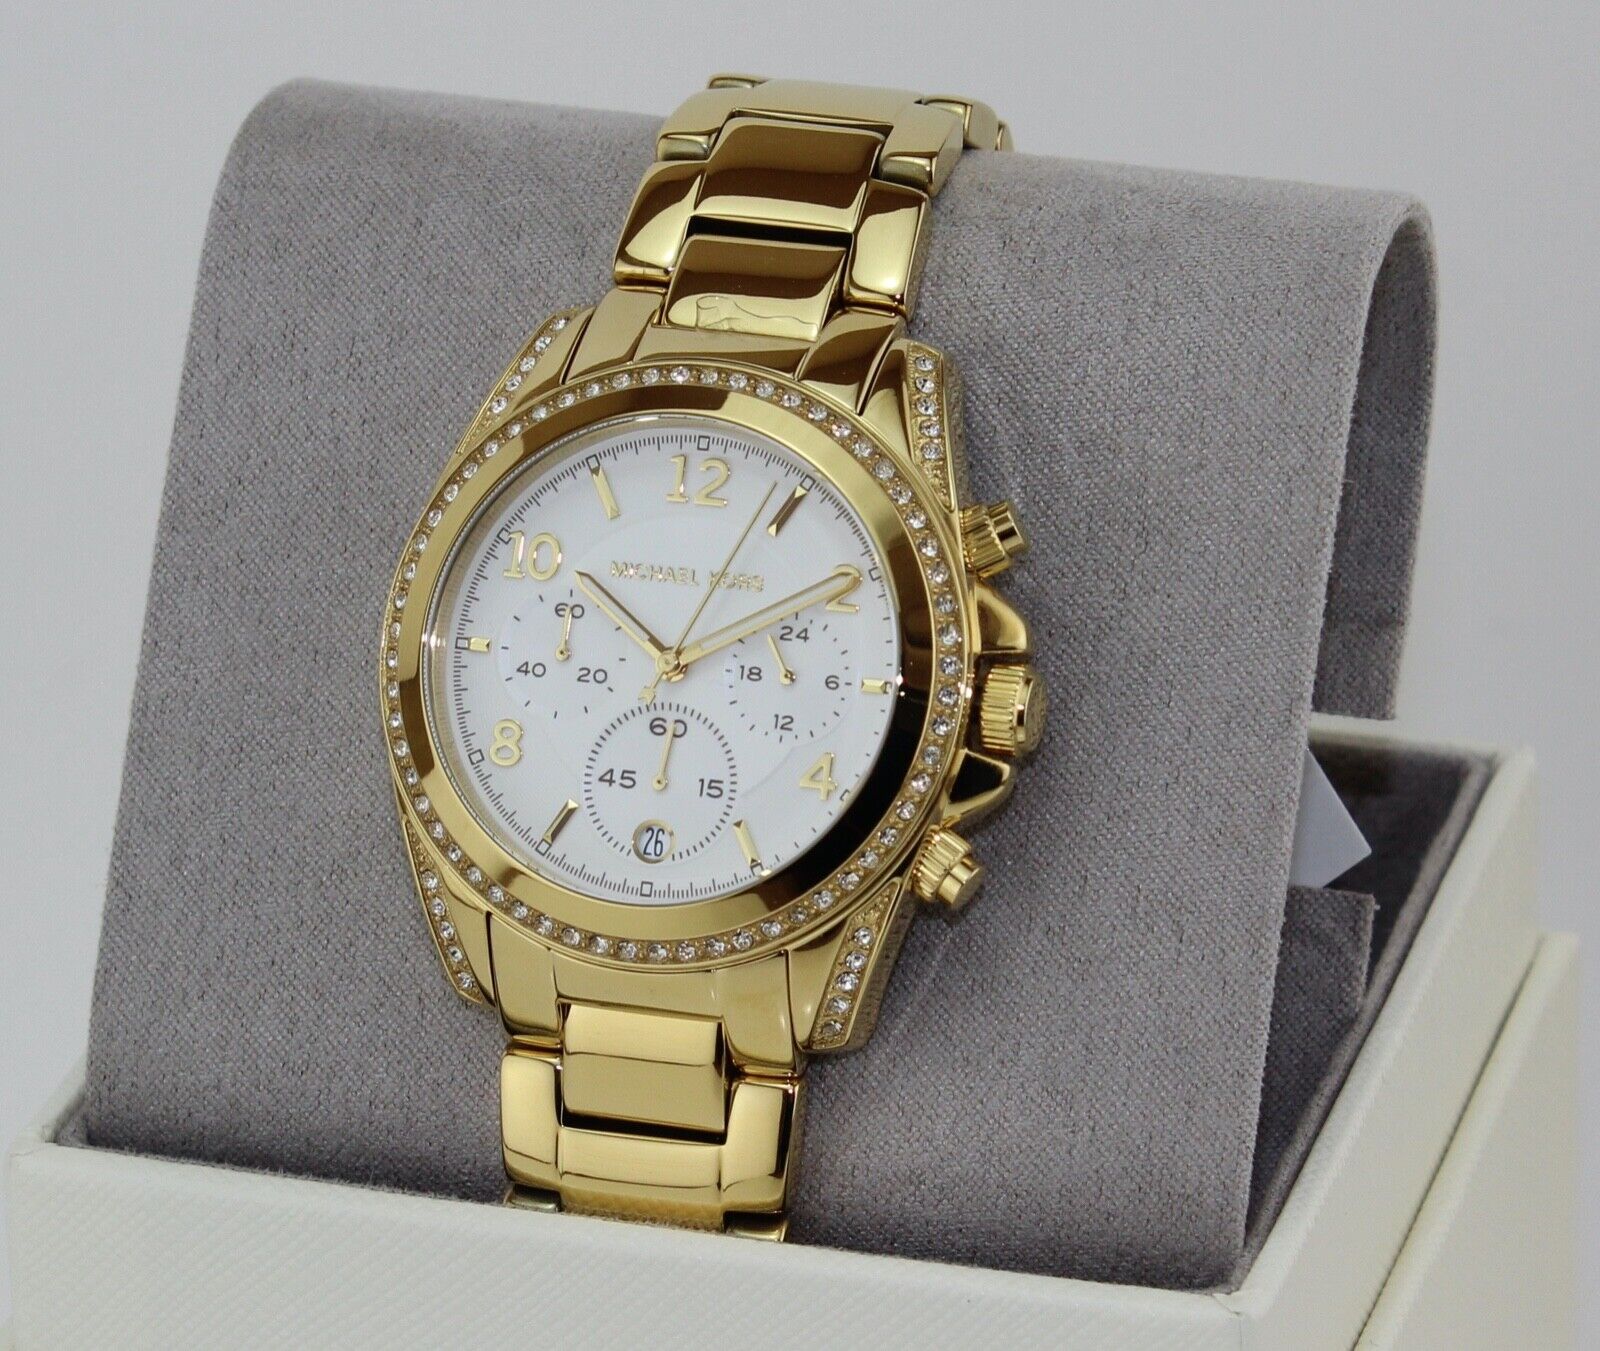 NEW AUTHENTIC MICHAEL KORS BLAIR CHRONOGRAPH GOLD CRYSTALS WOMEN'S MK6762 WATCH